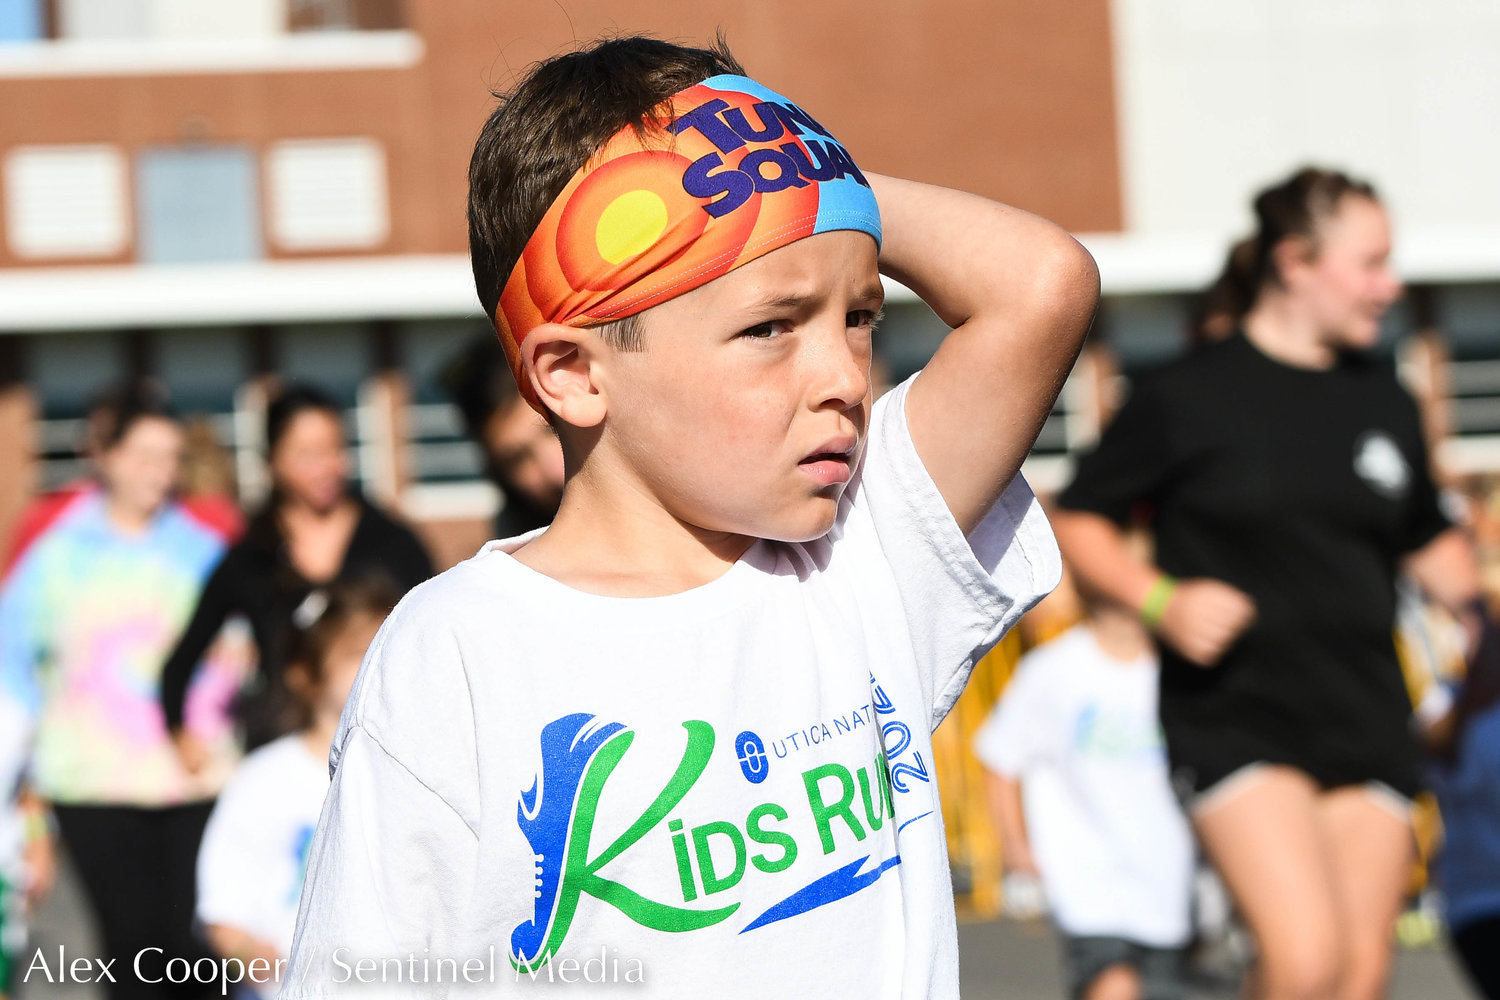 A young boy wears a Tune Squad headband while participating in the Utica National Kids Run at Mohawk Valley Community College in Utica on Saturday.